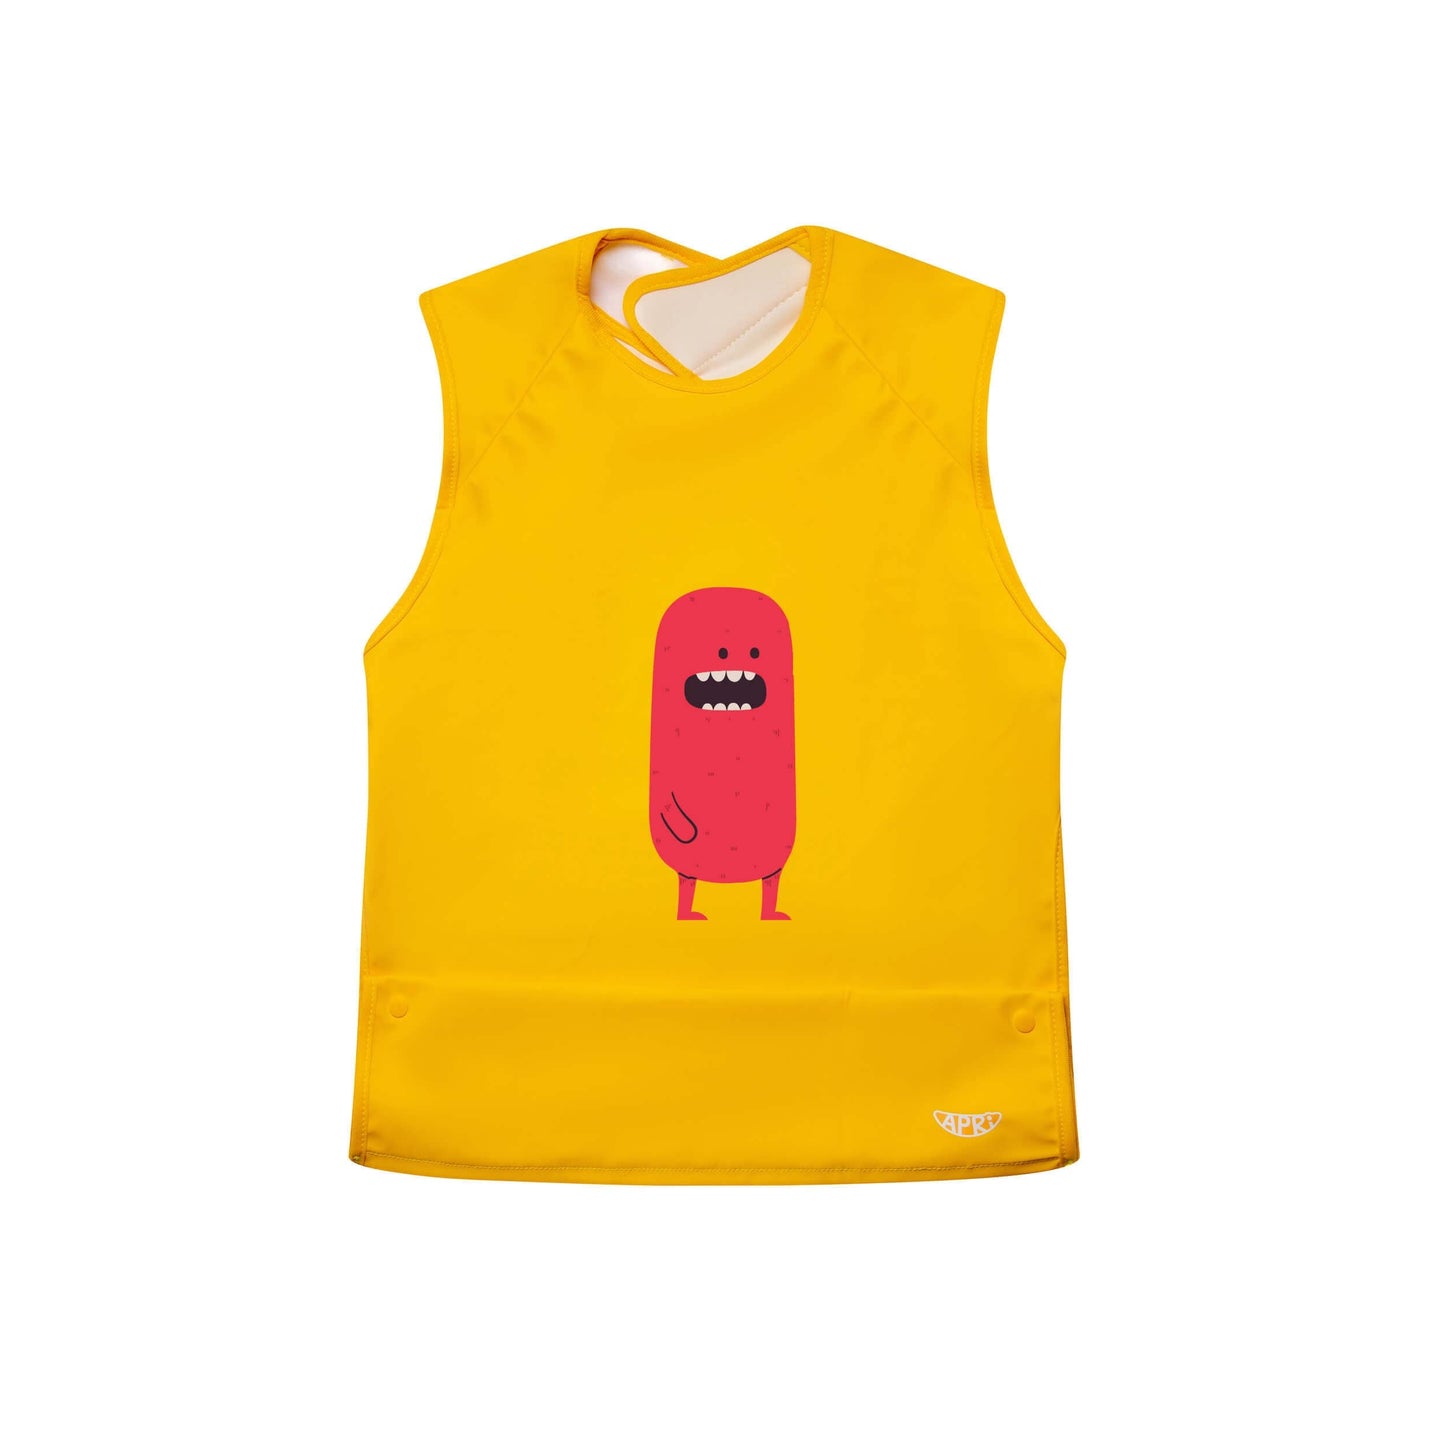 Washable bib for kids, teens and adults with disabilities. Yellow cap-sleeve with food collection pocket and cute red monster print